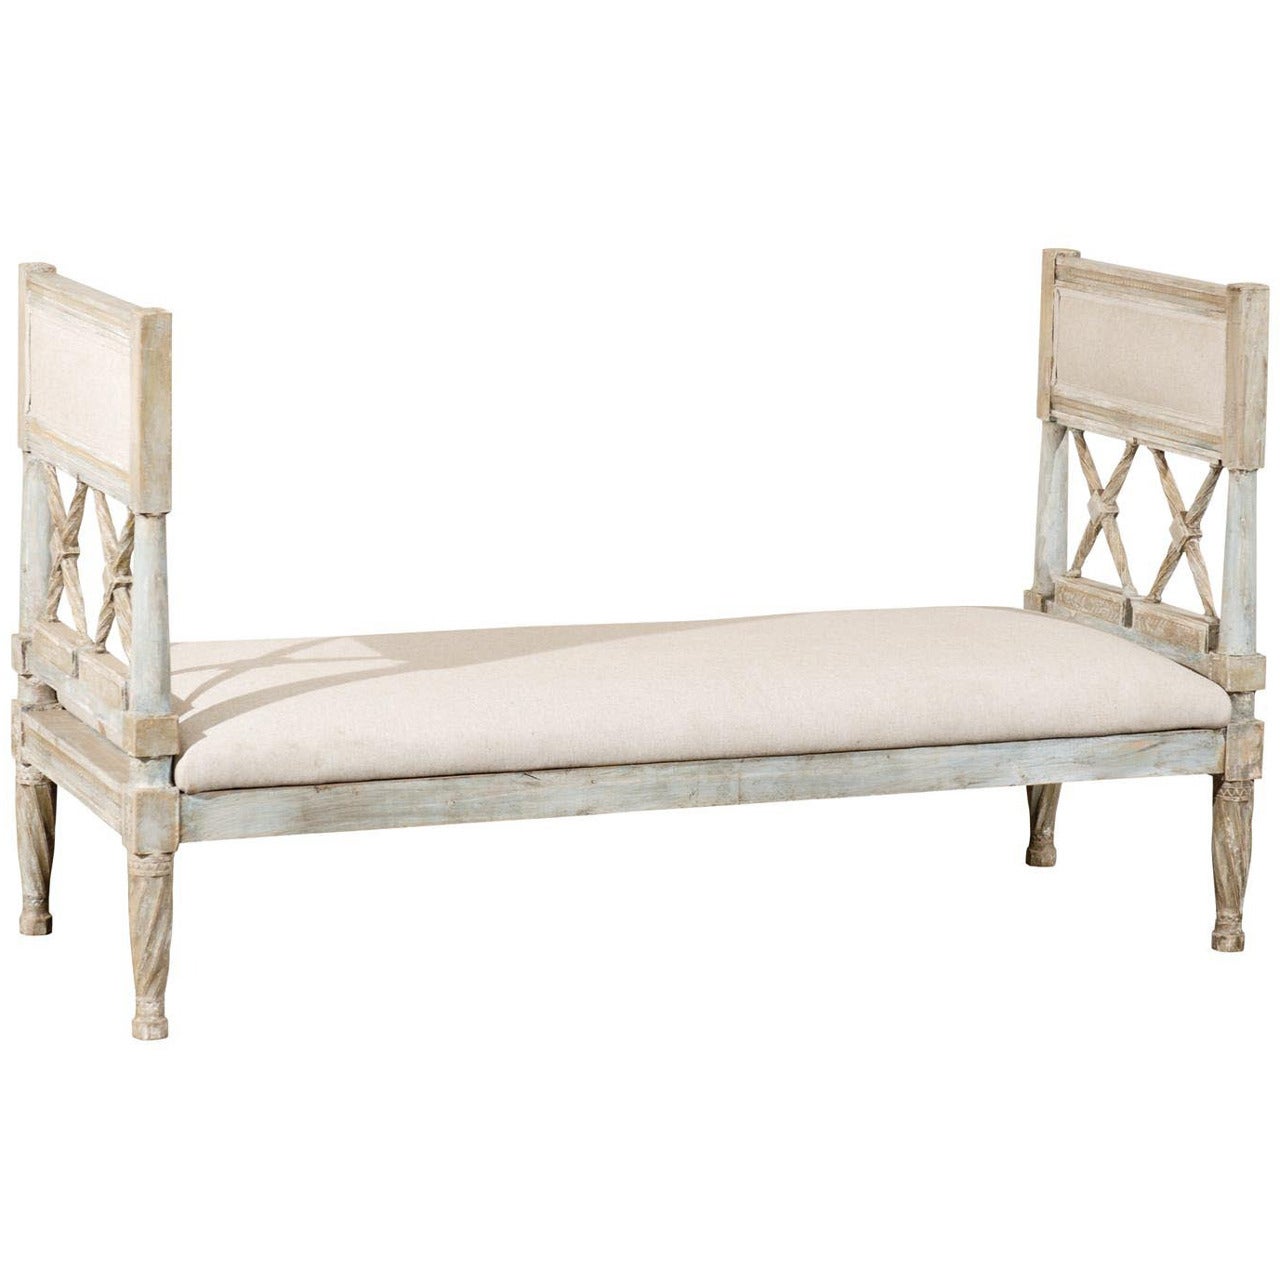 19th Century Gustavian Style Painted Wood Daybed